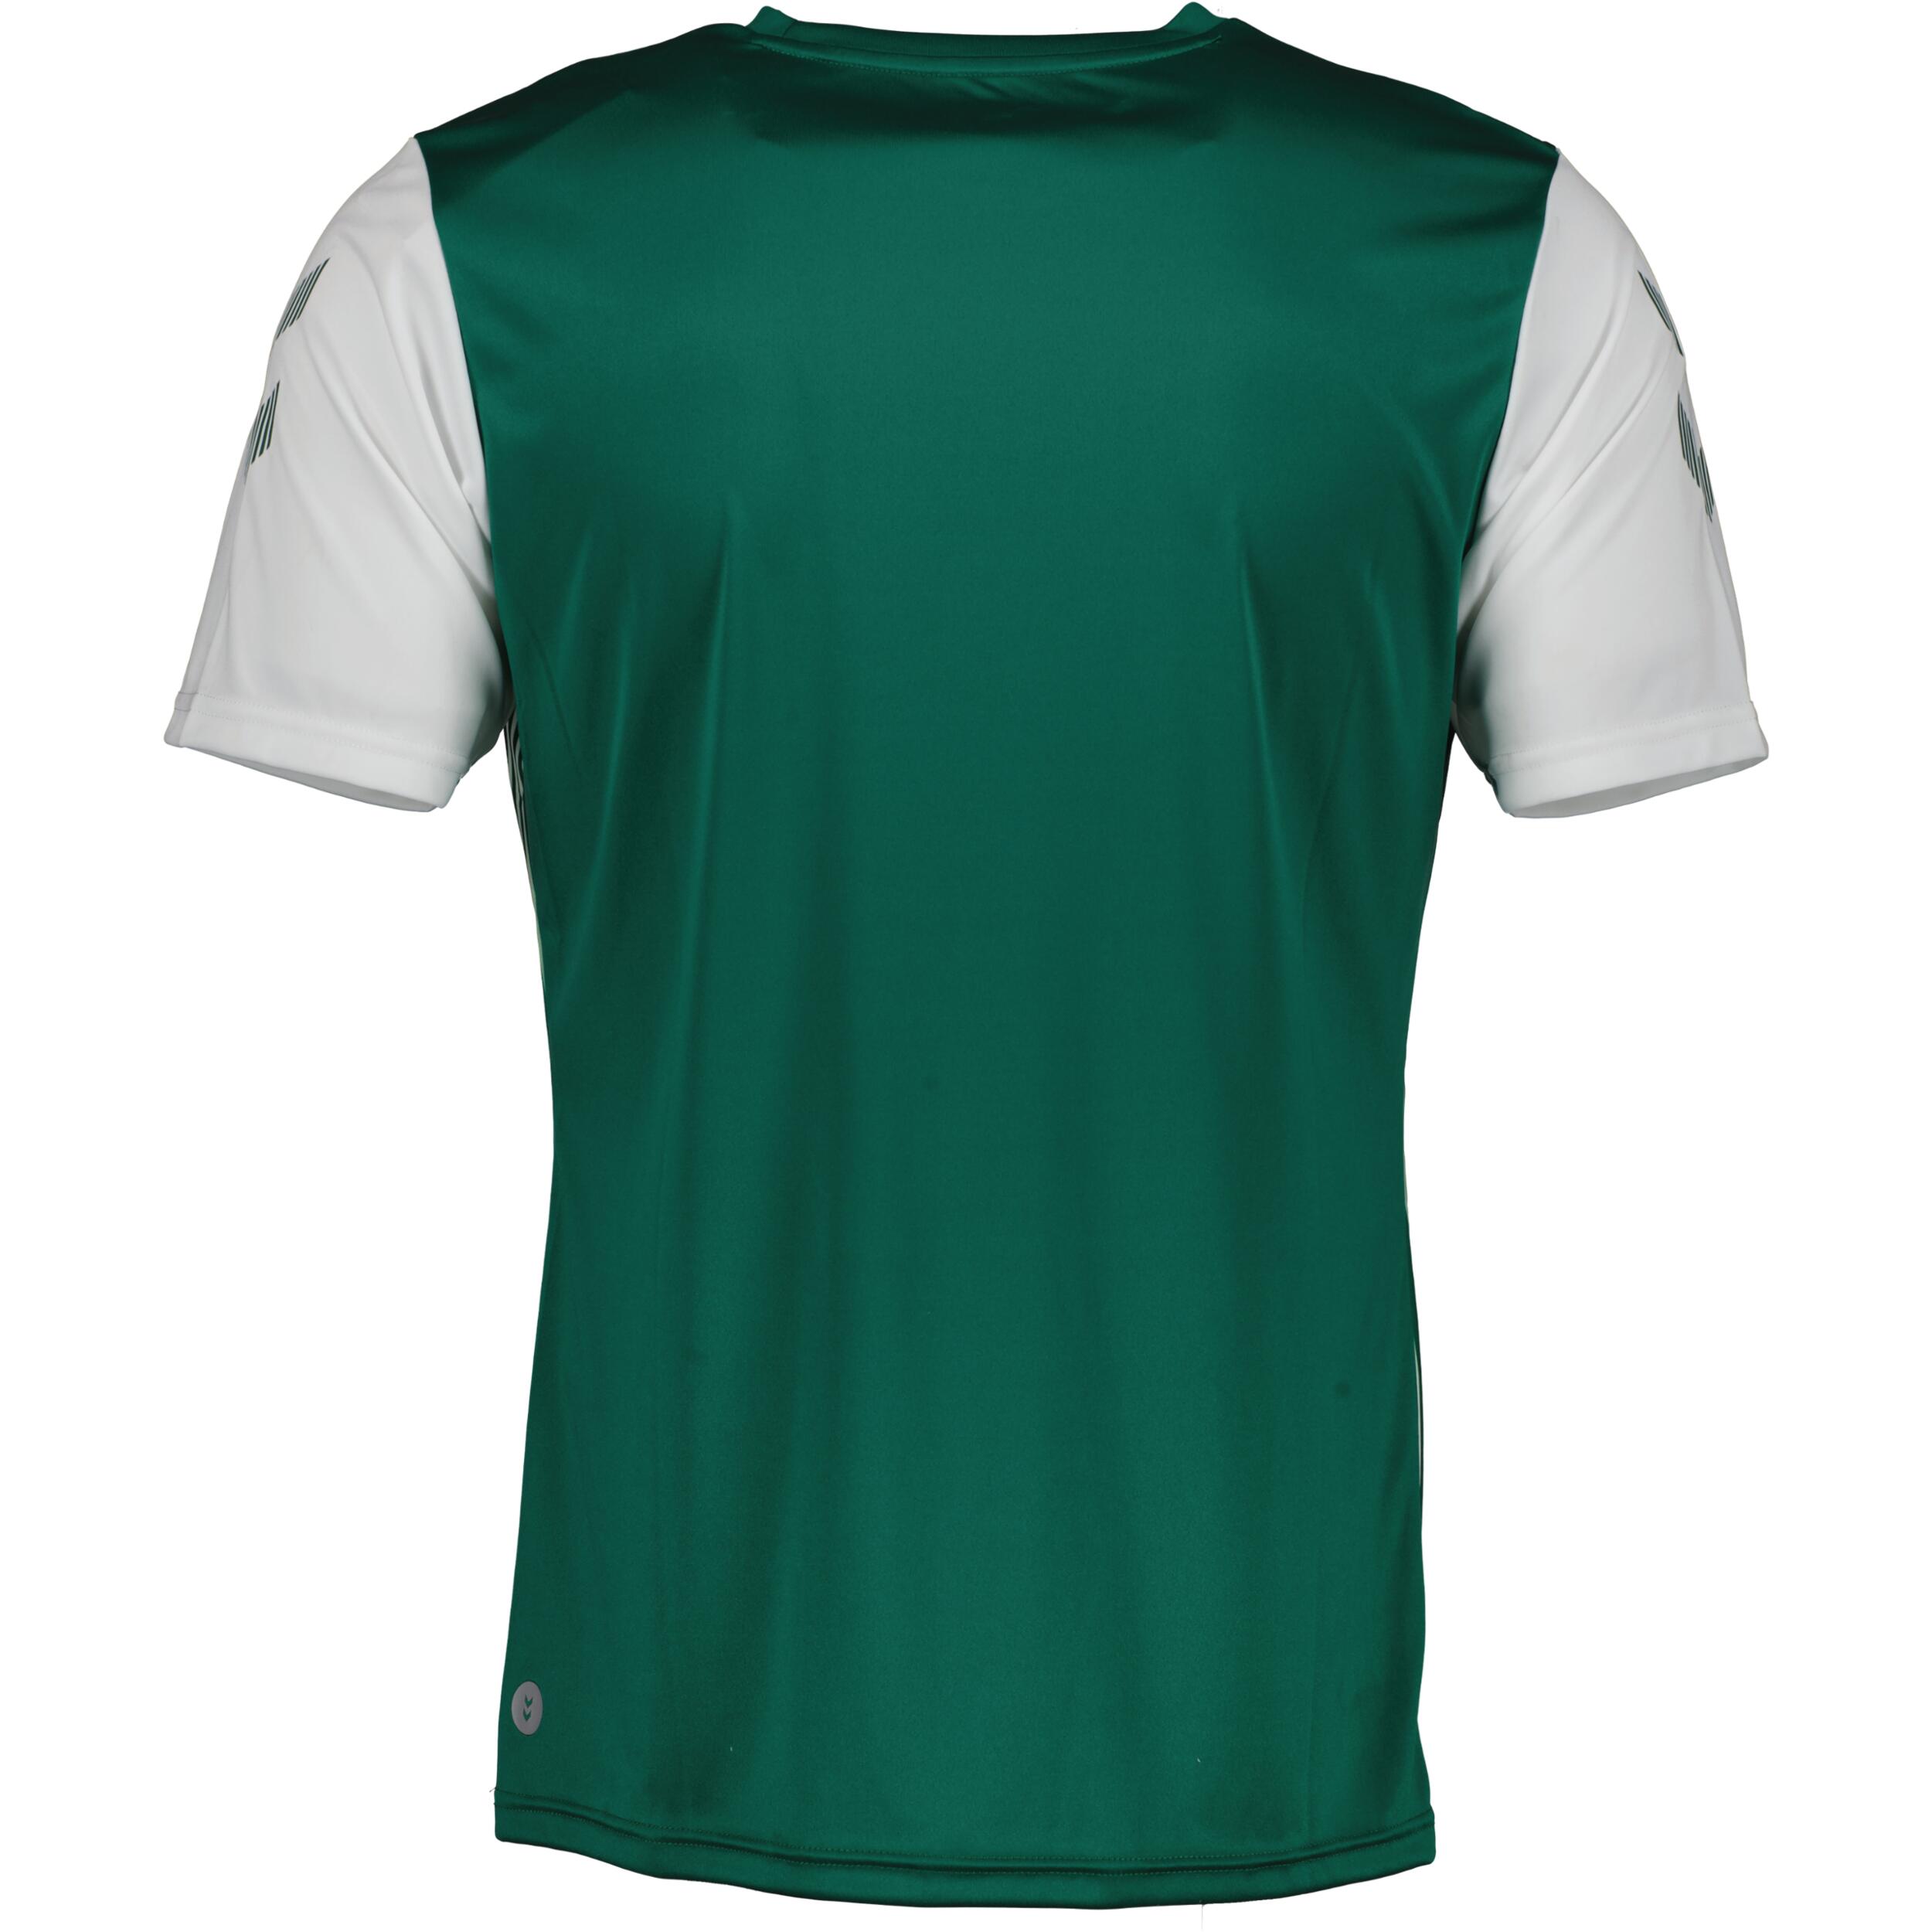 Mexico jersey for men, great for football, in evergreen/white 2/3